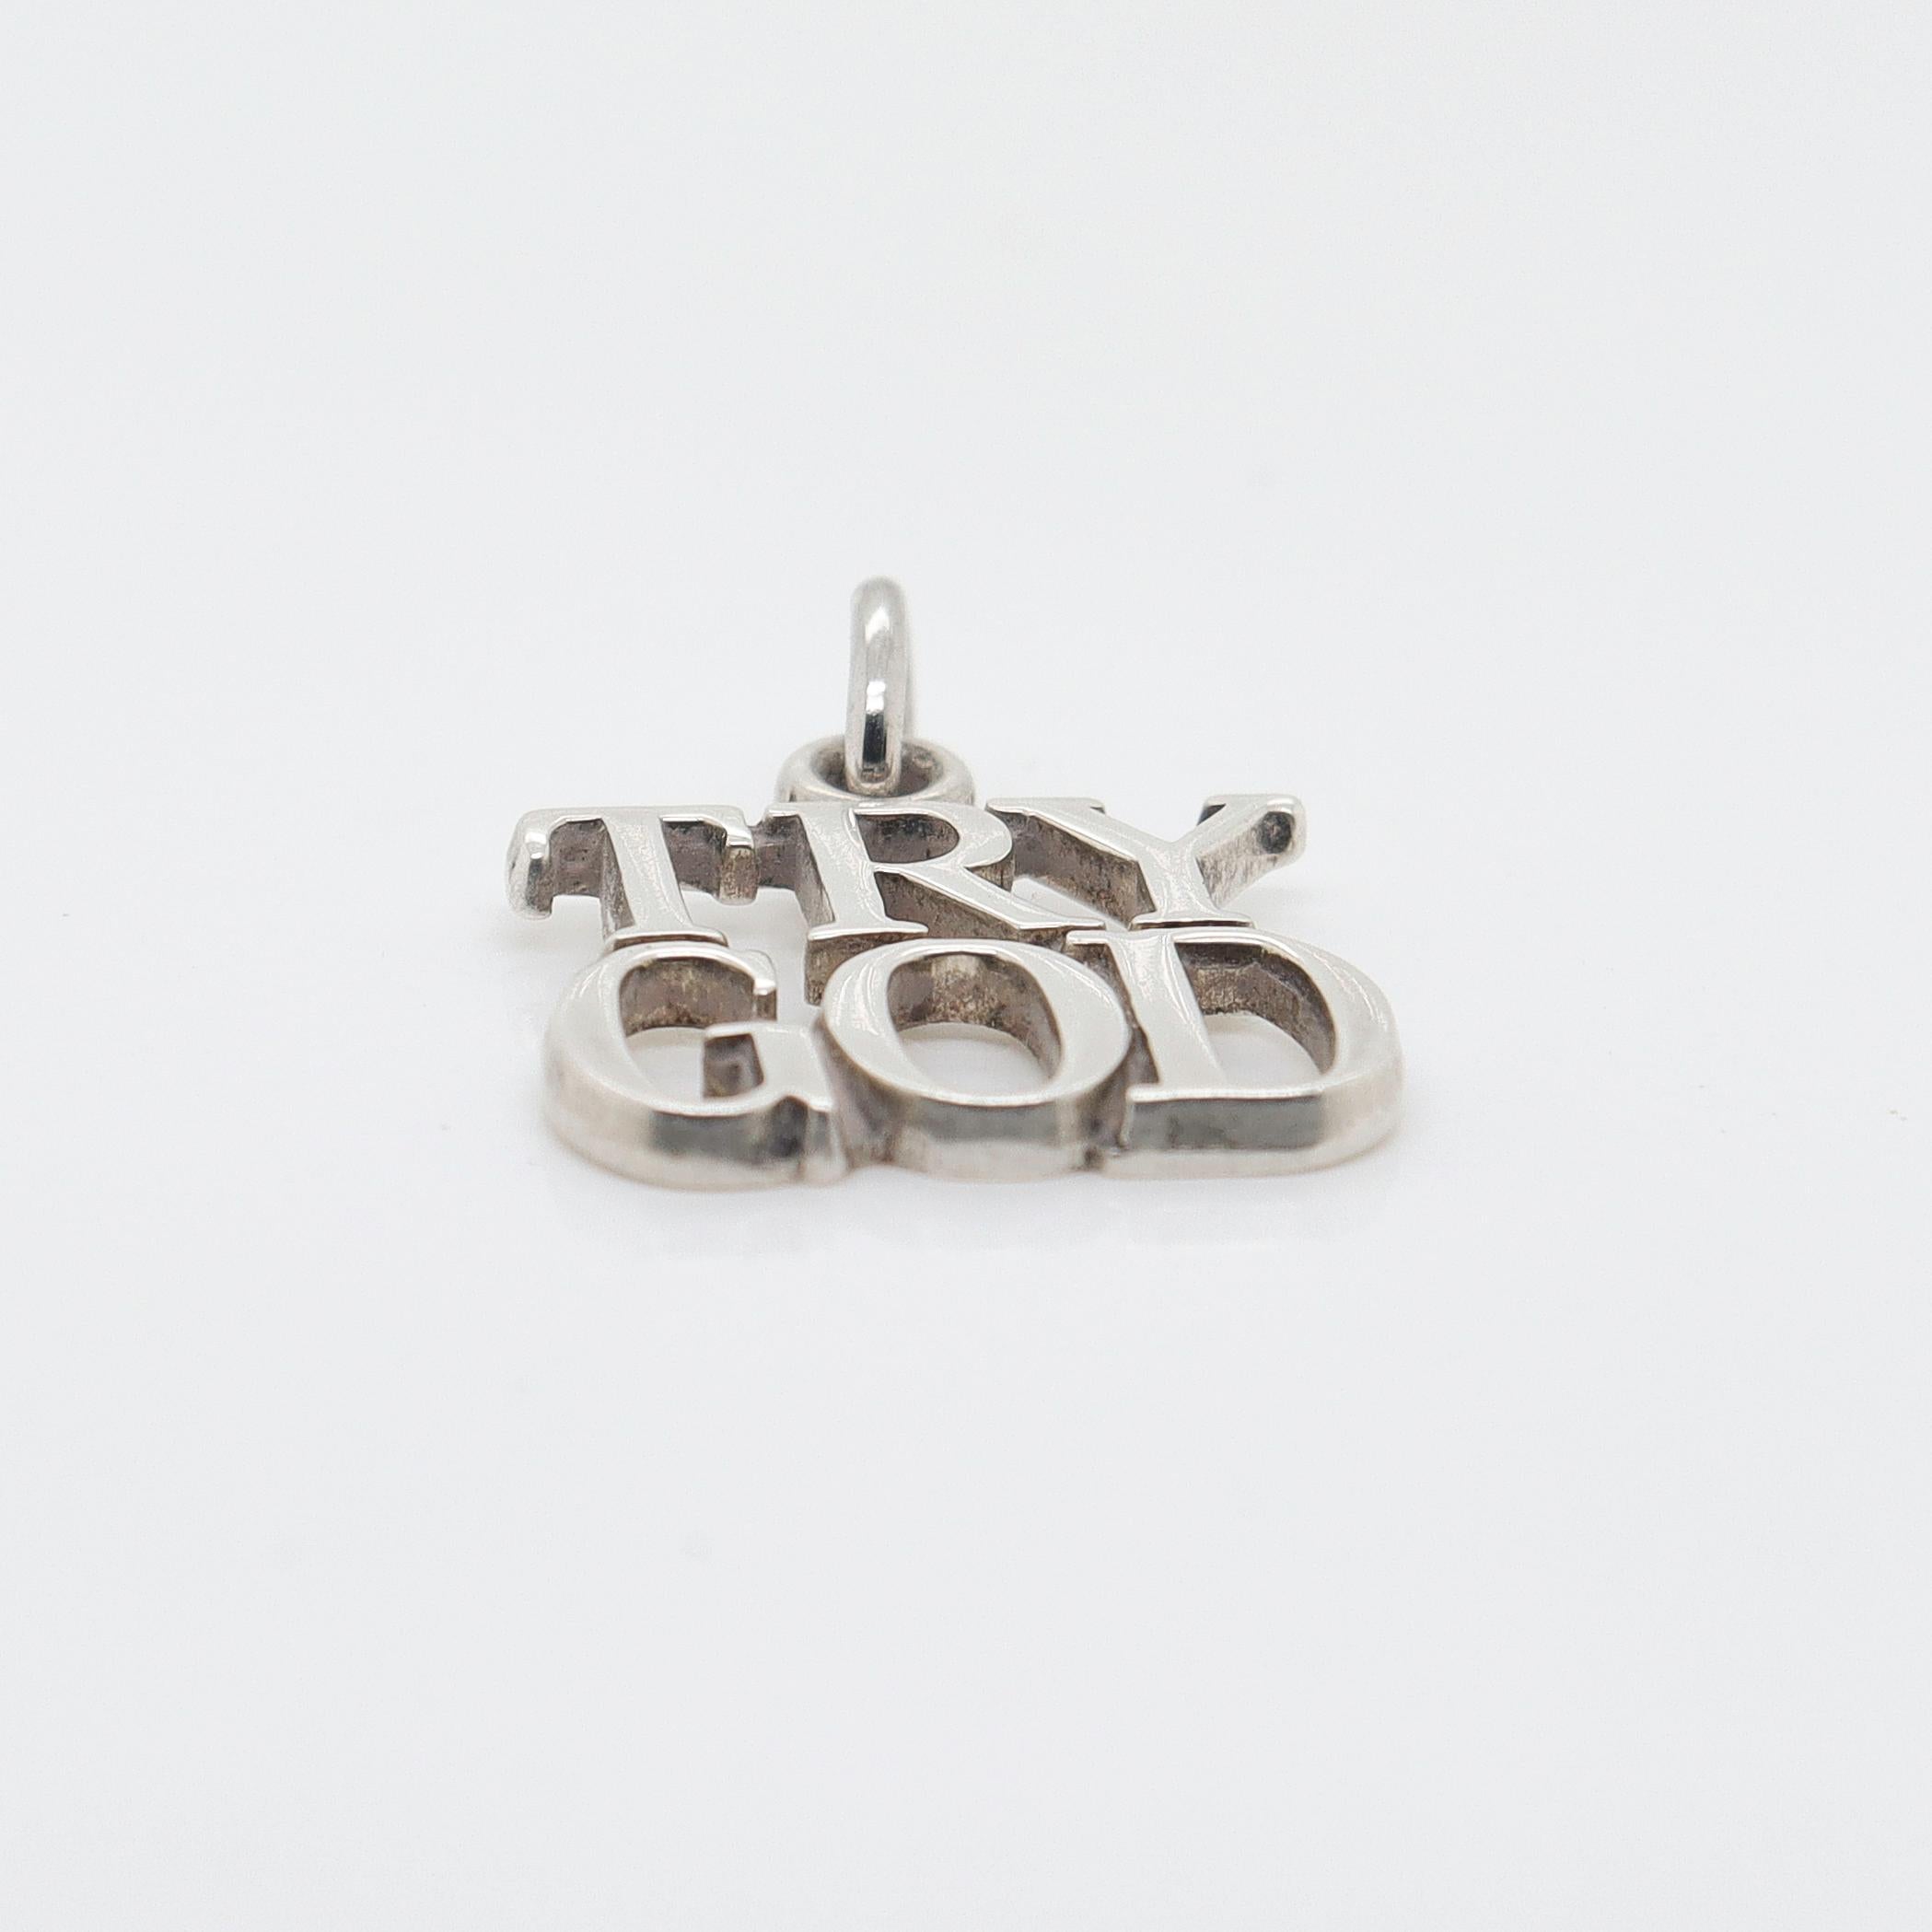 Tiffany & Co. 'Try God' Charm Pendant for a Necklace or Bracelet 1